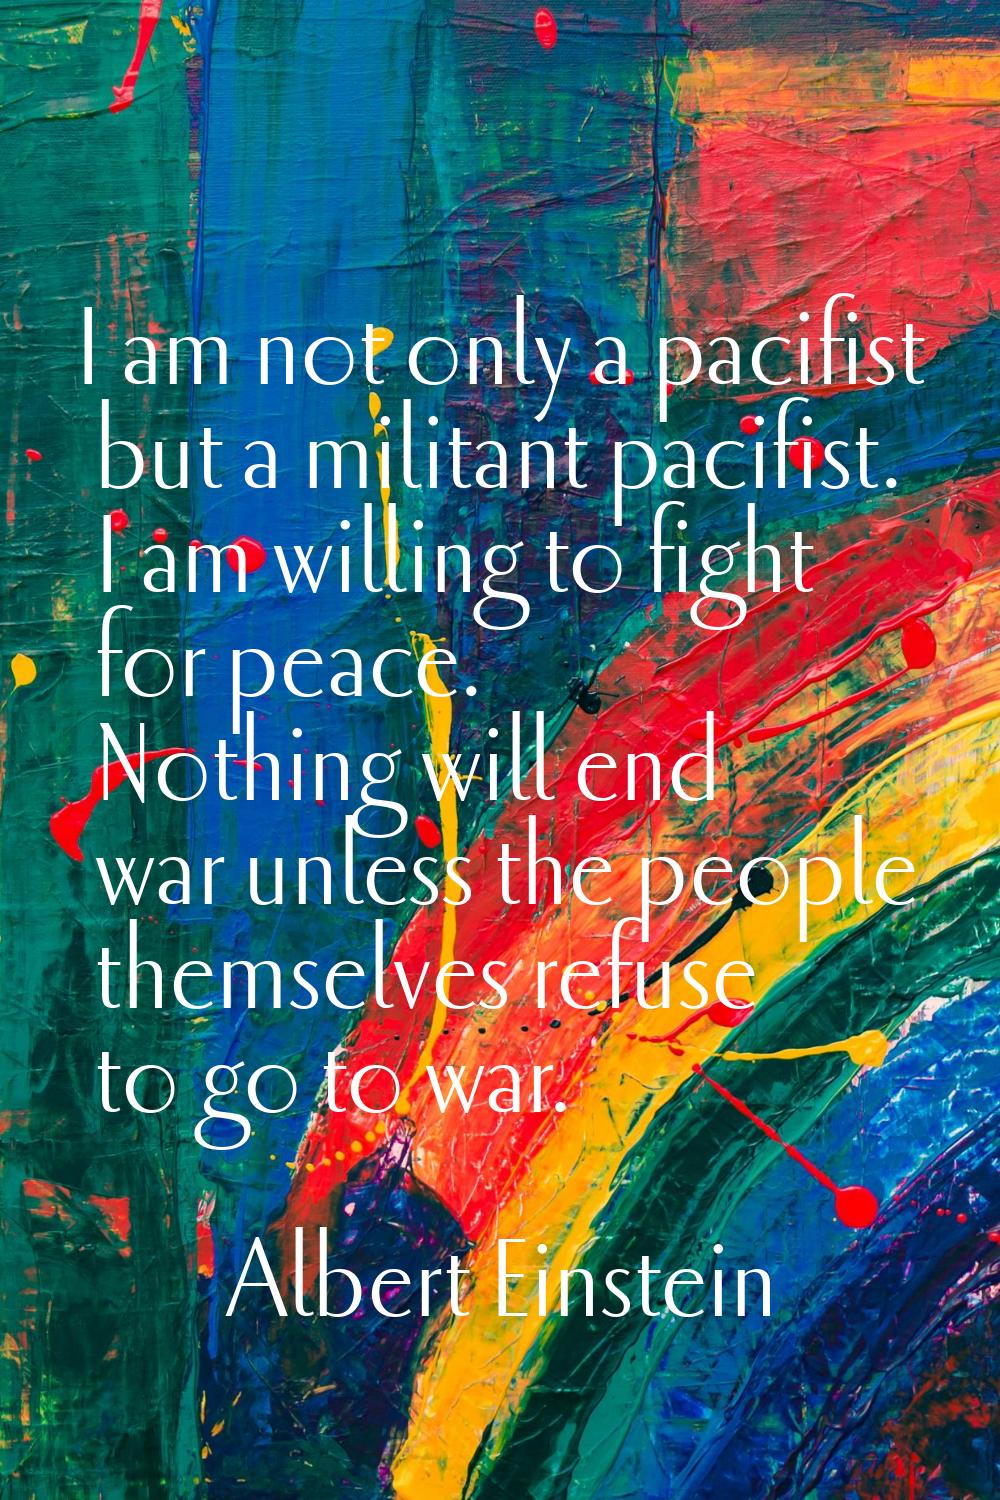 I am not only a pacifist but a militant pacifist. I am willing to fight for peace. Nothing will end